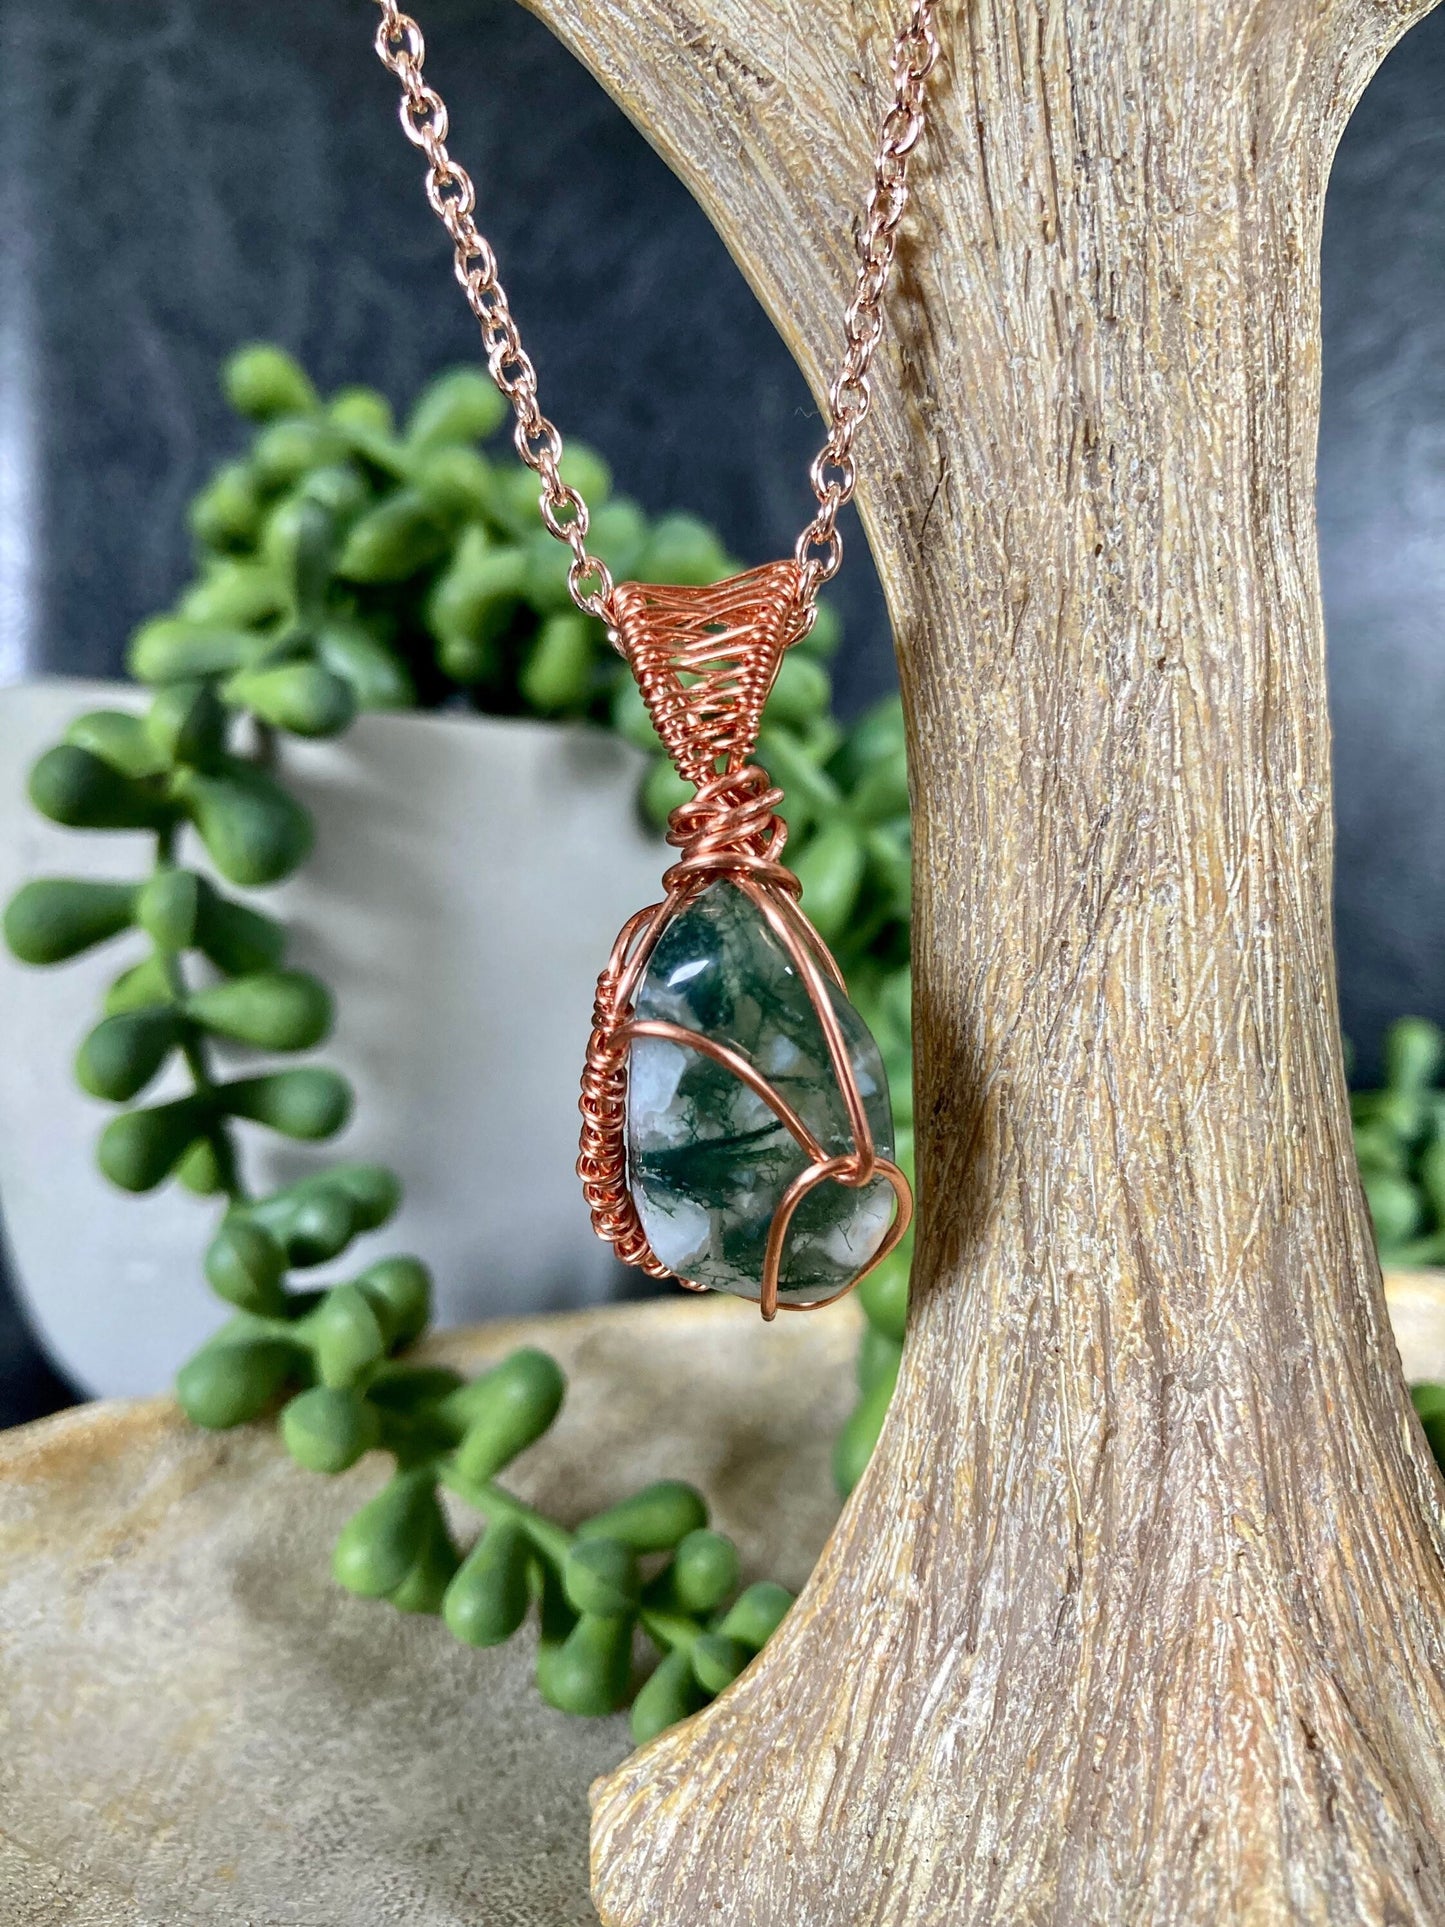 Tree agate pendant handmade necklace wire wrapped natural stone with 18 inch length chain